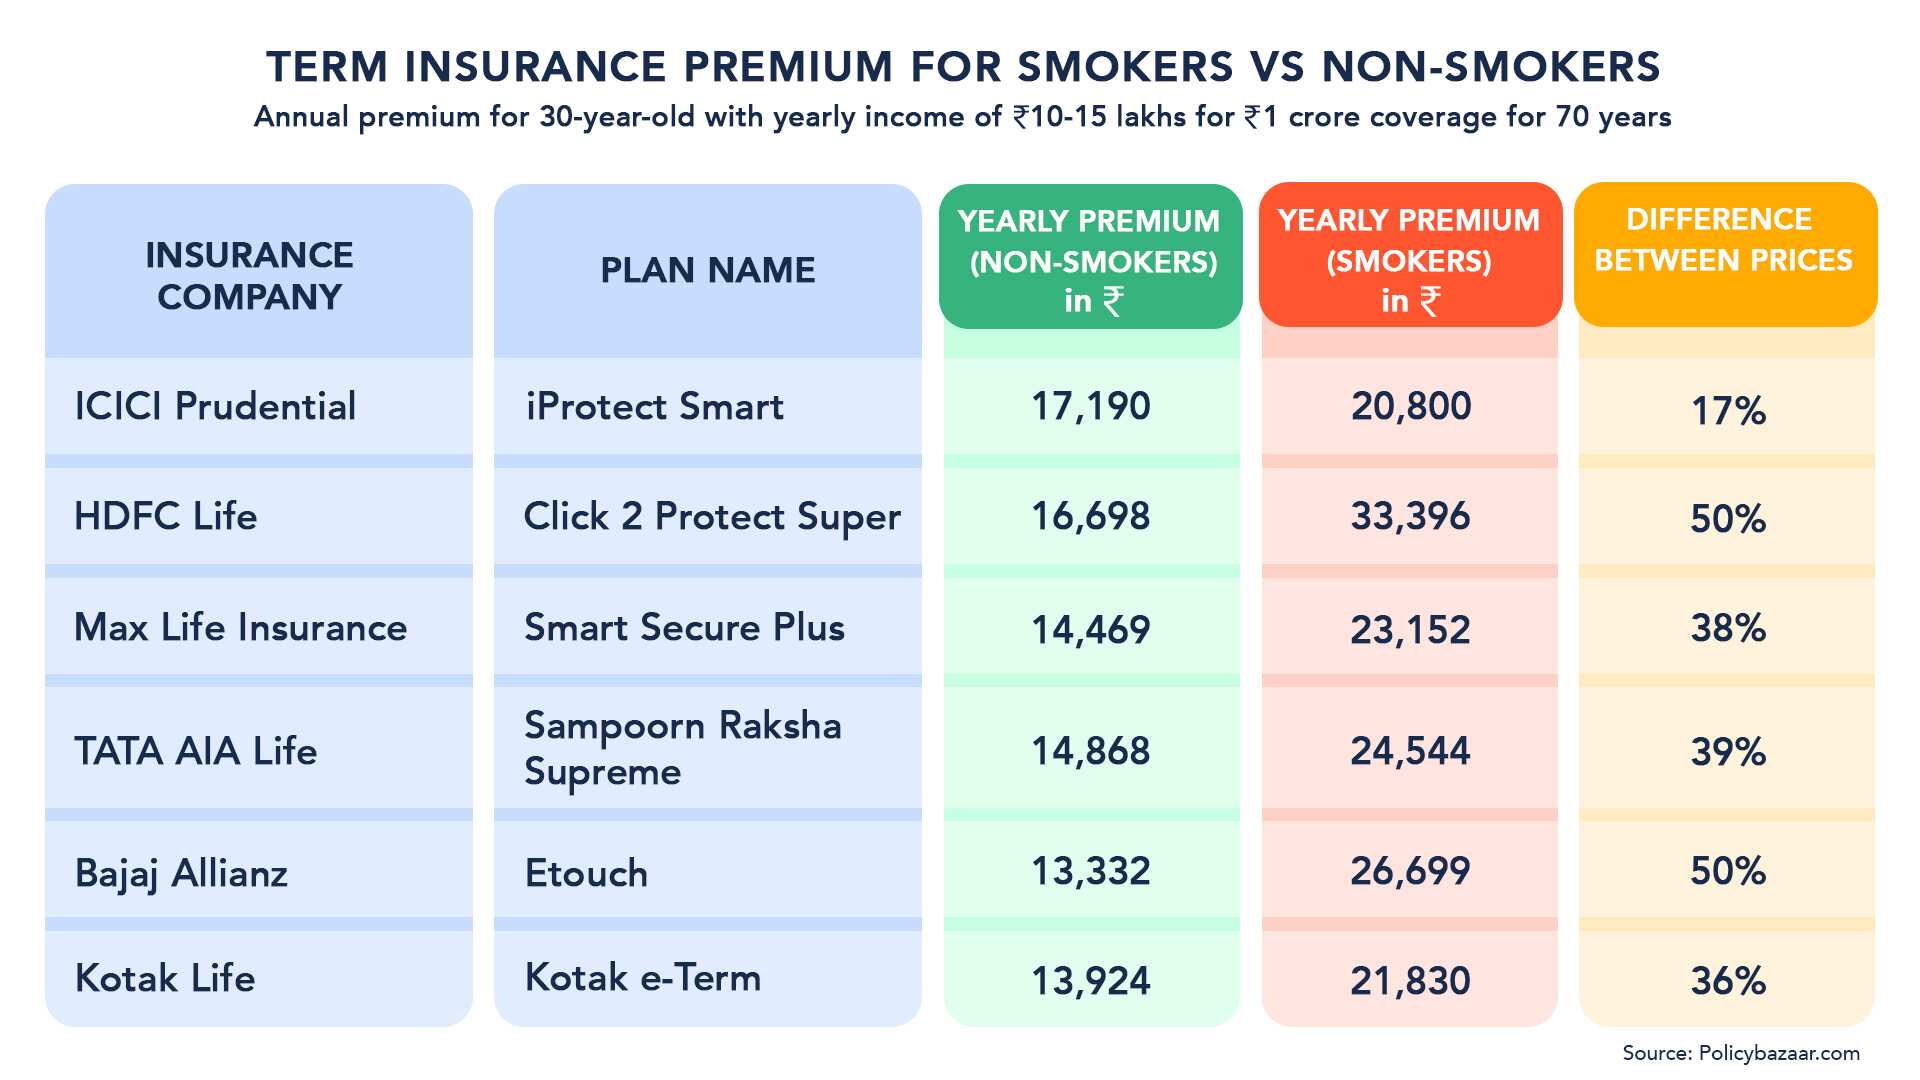 World No Tobacco Day: Smoking is injurious to wealth — how non-smokers can save up to 50% on term insurance premium